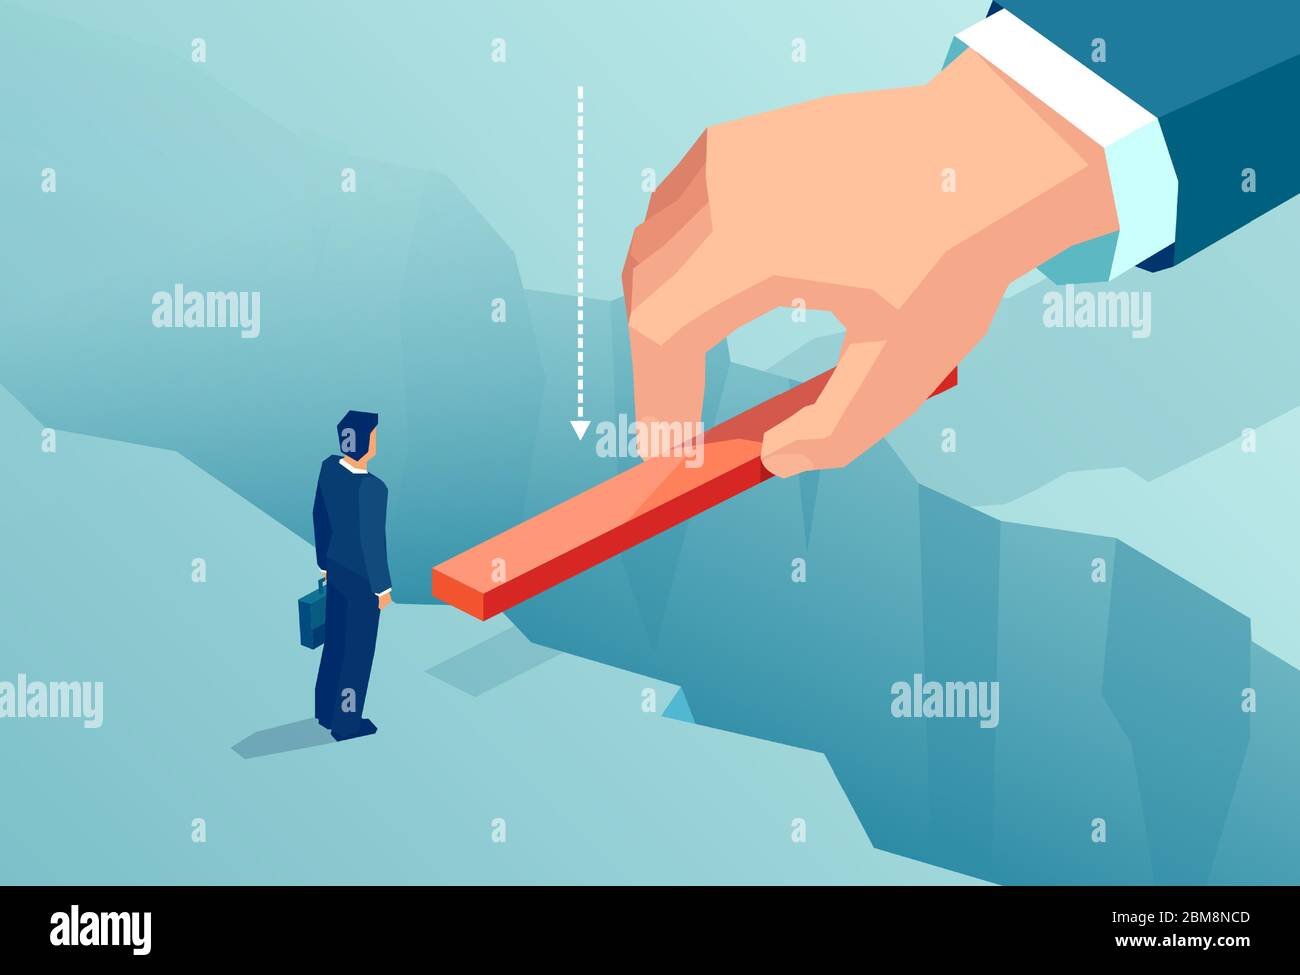 Vector of a small businessman supported by unknown investor bridging the gap in his career path Stock Vector